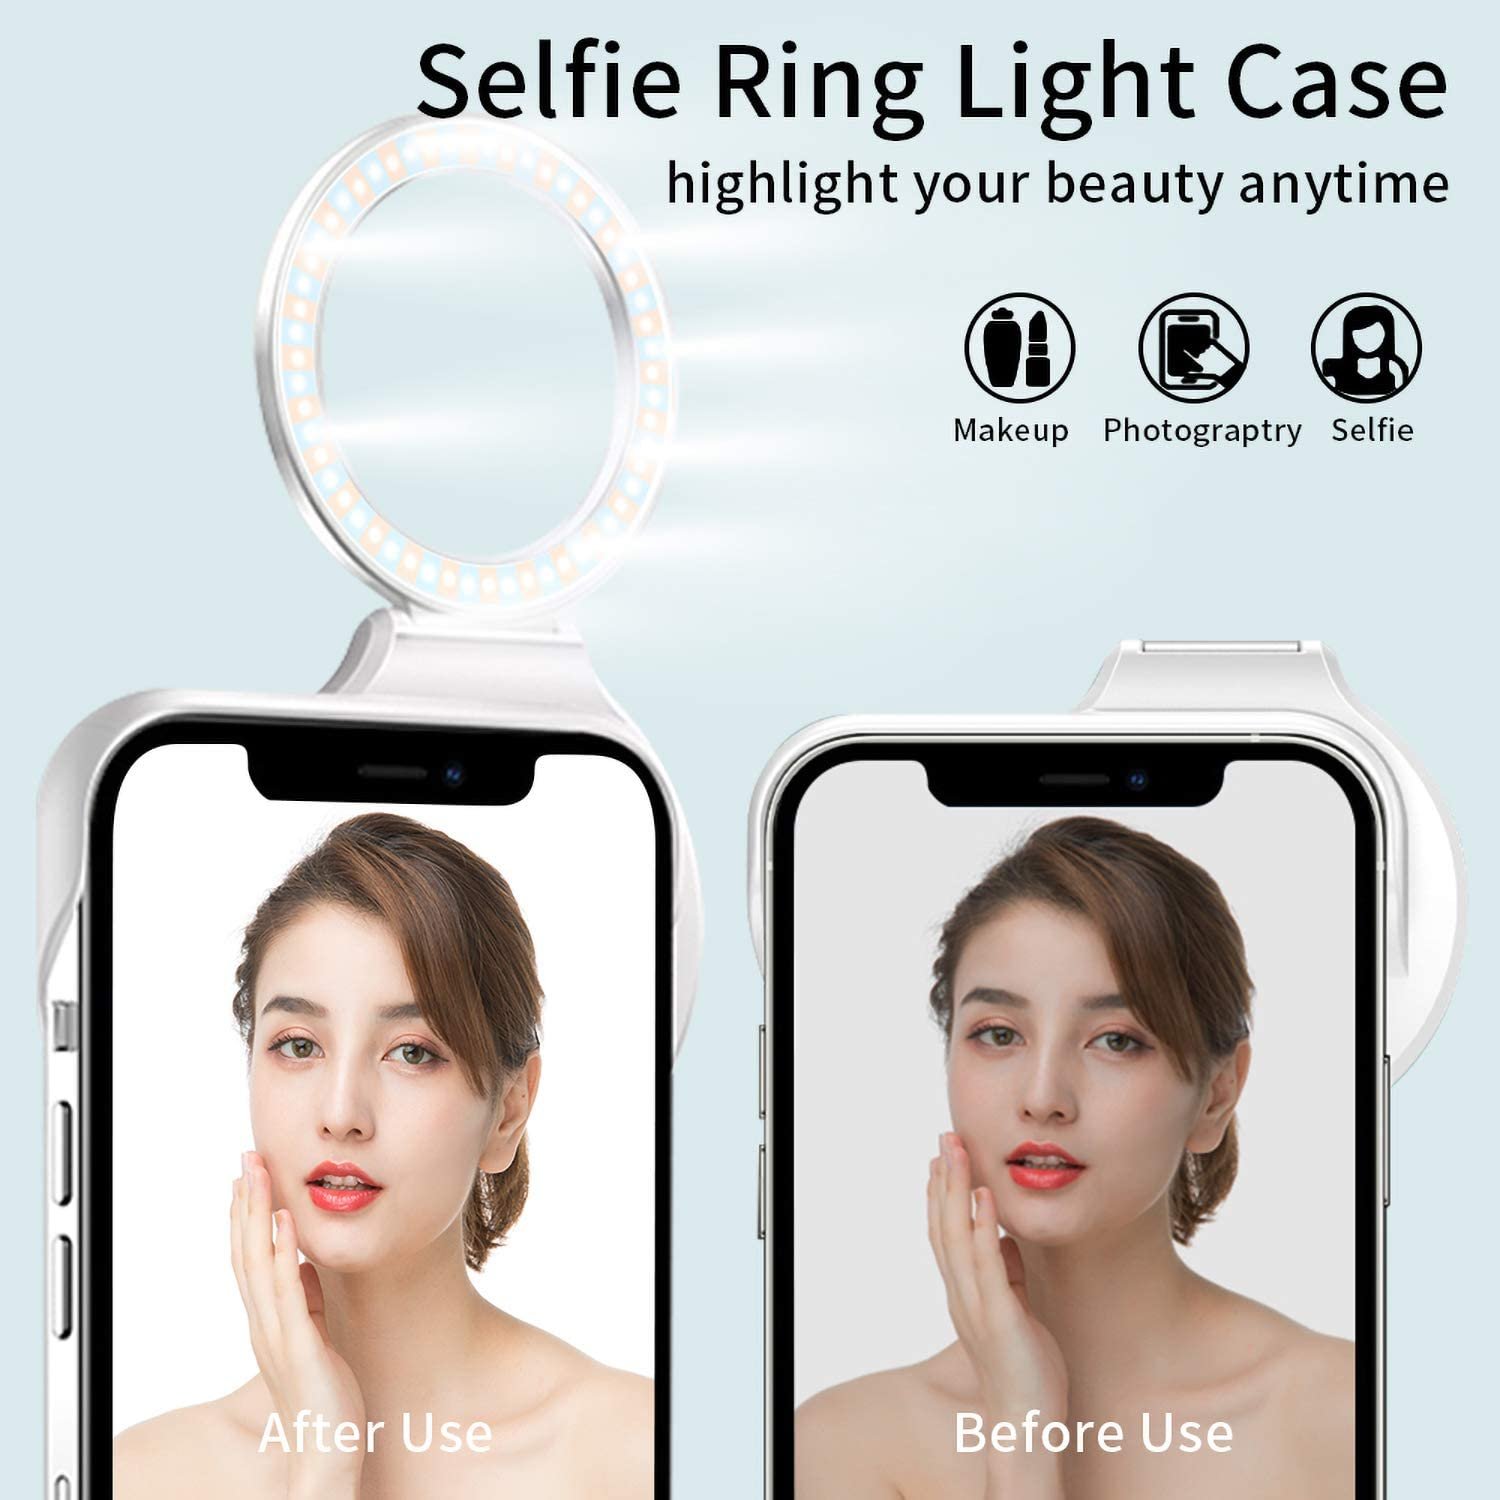 LED Ring Light Case For iPhones - Plug.tech